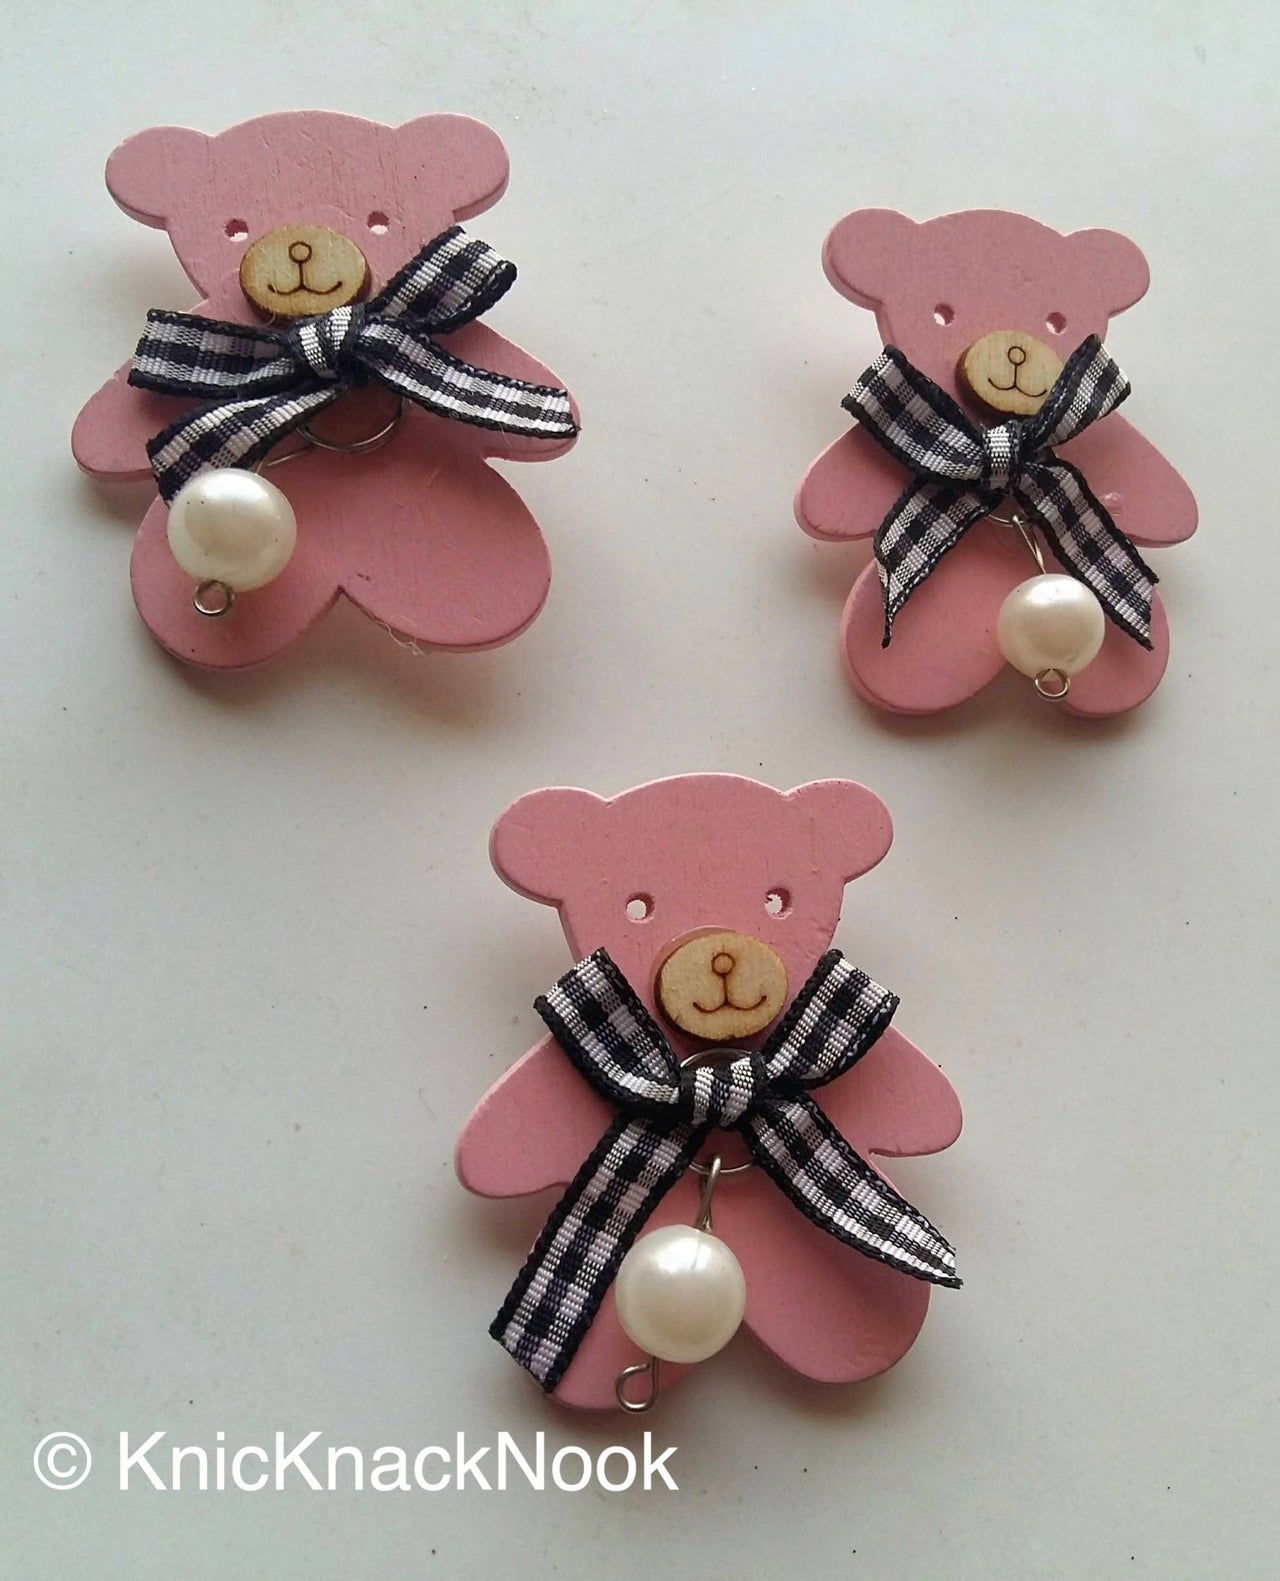 1 x Pink Teddy Bear Wood Applique Patch With Gingham Bow And Pearl Hanging, Pin Back, Bear Brooch - 200317A119D